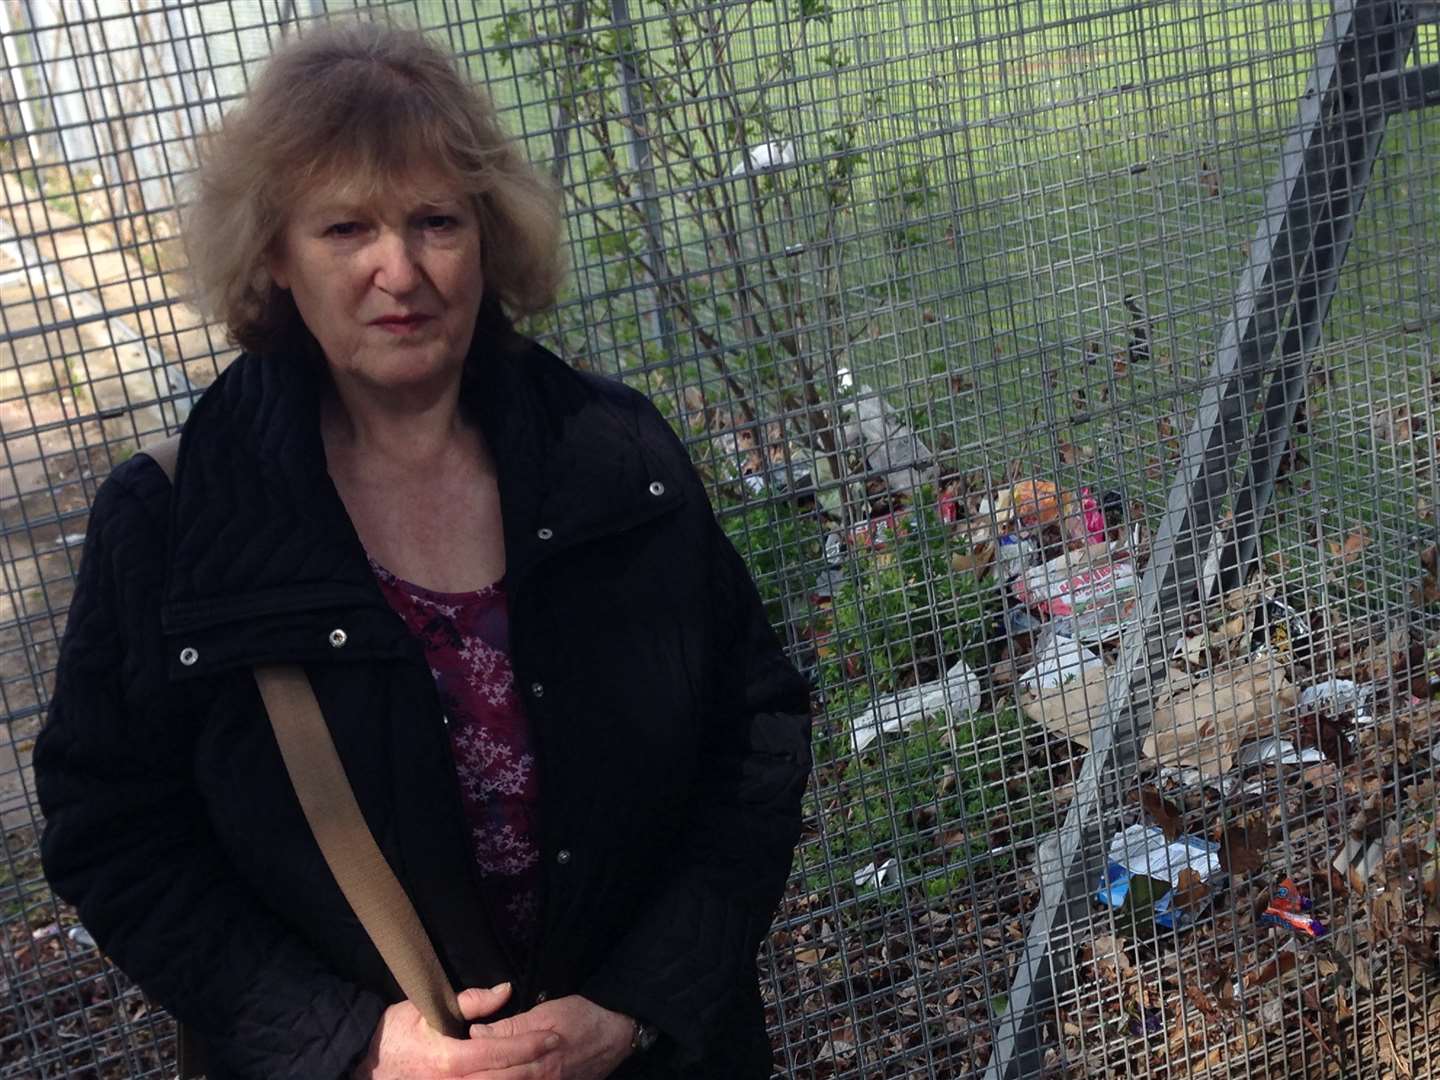 Rubbish found around Deal is a blight on our quality of life says environmentalist Vivien Clifford